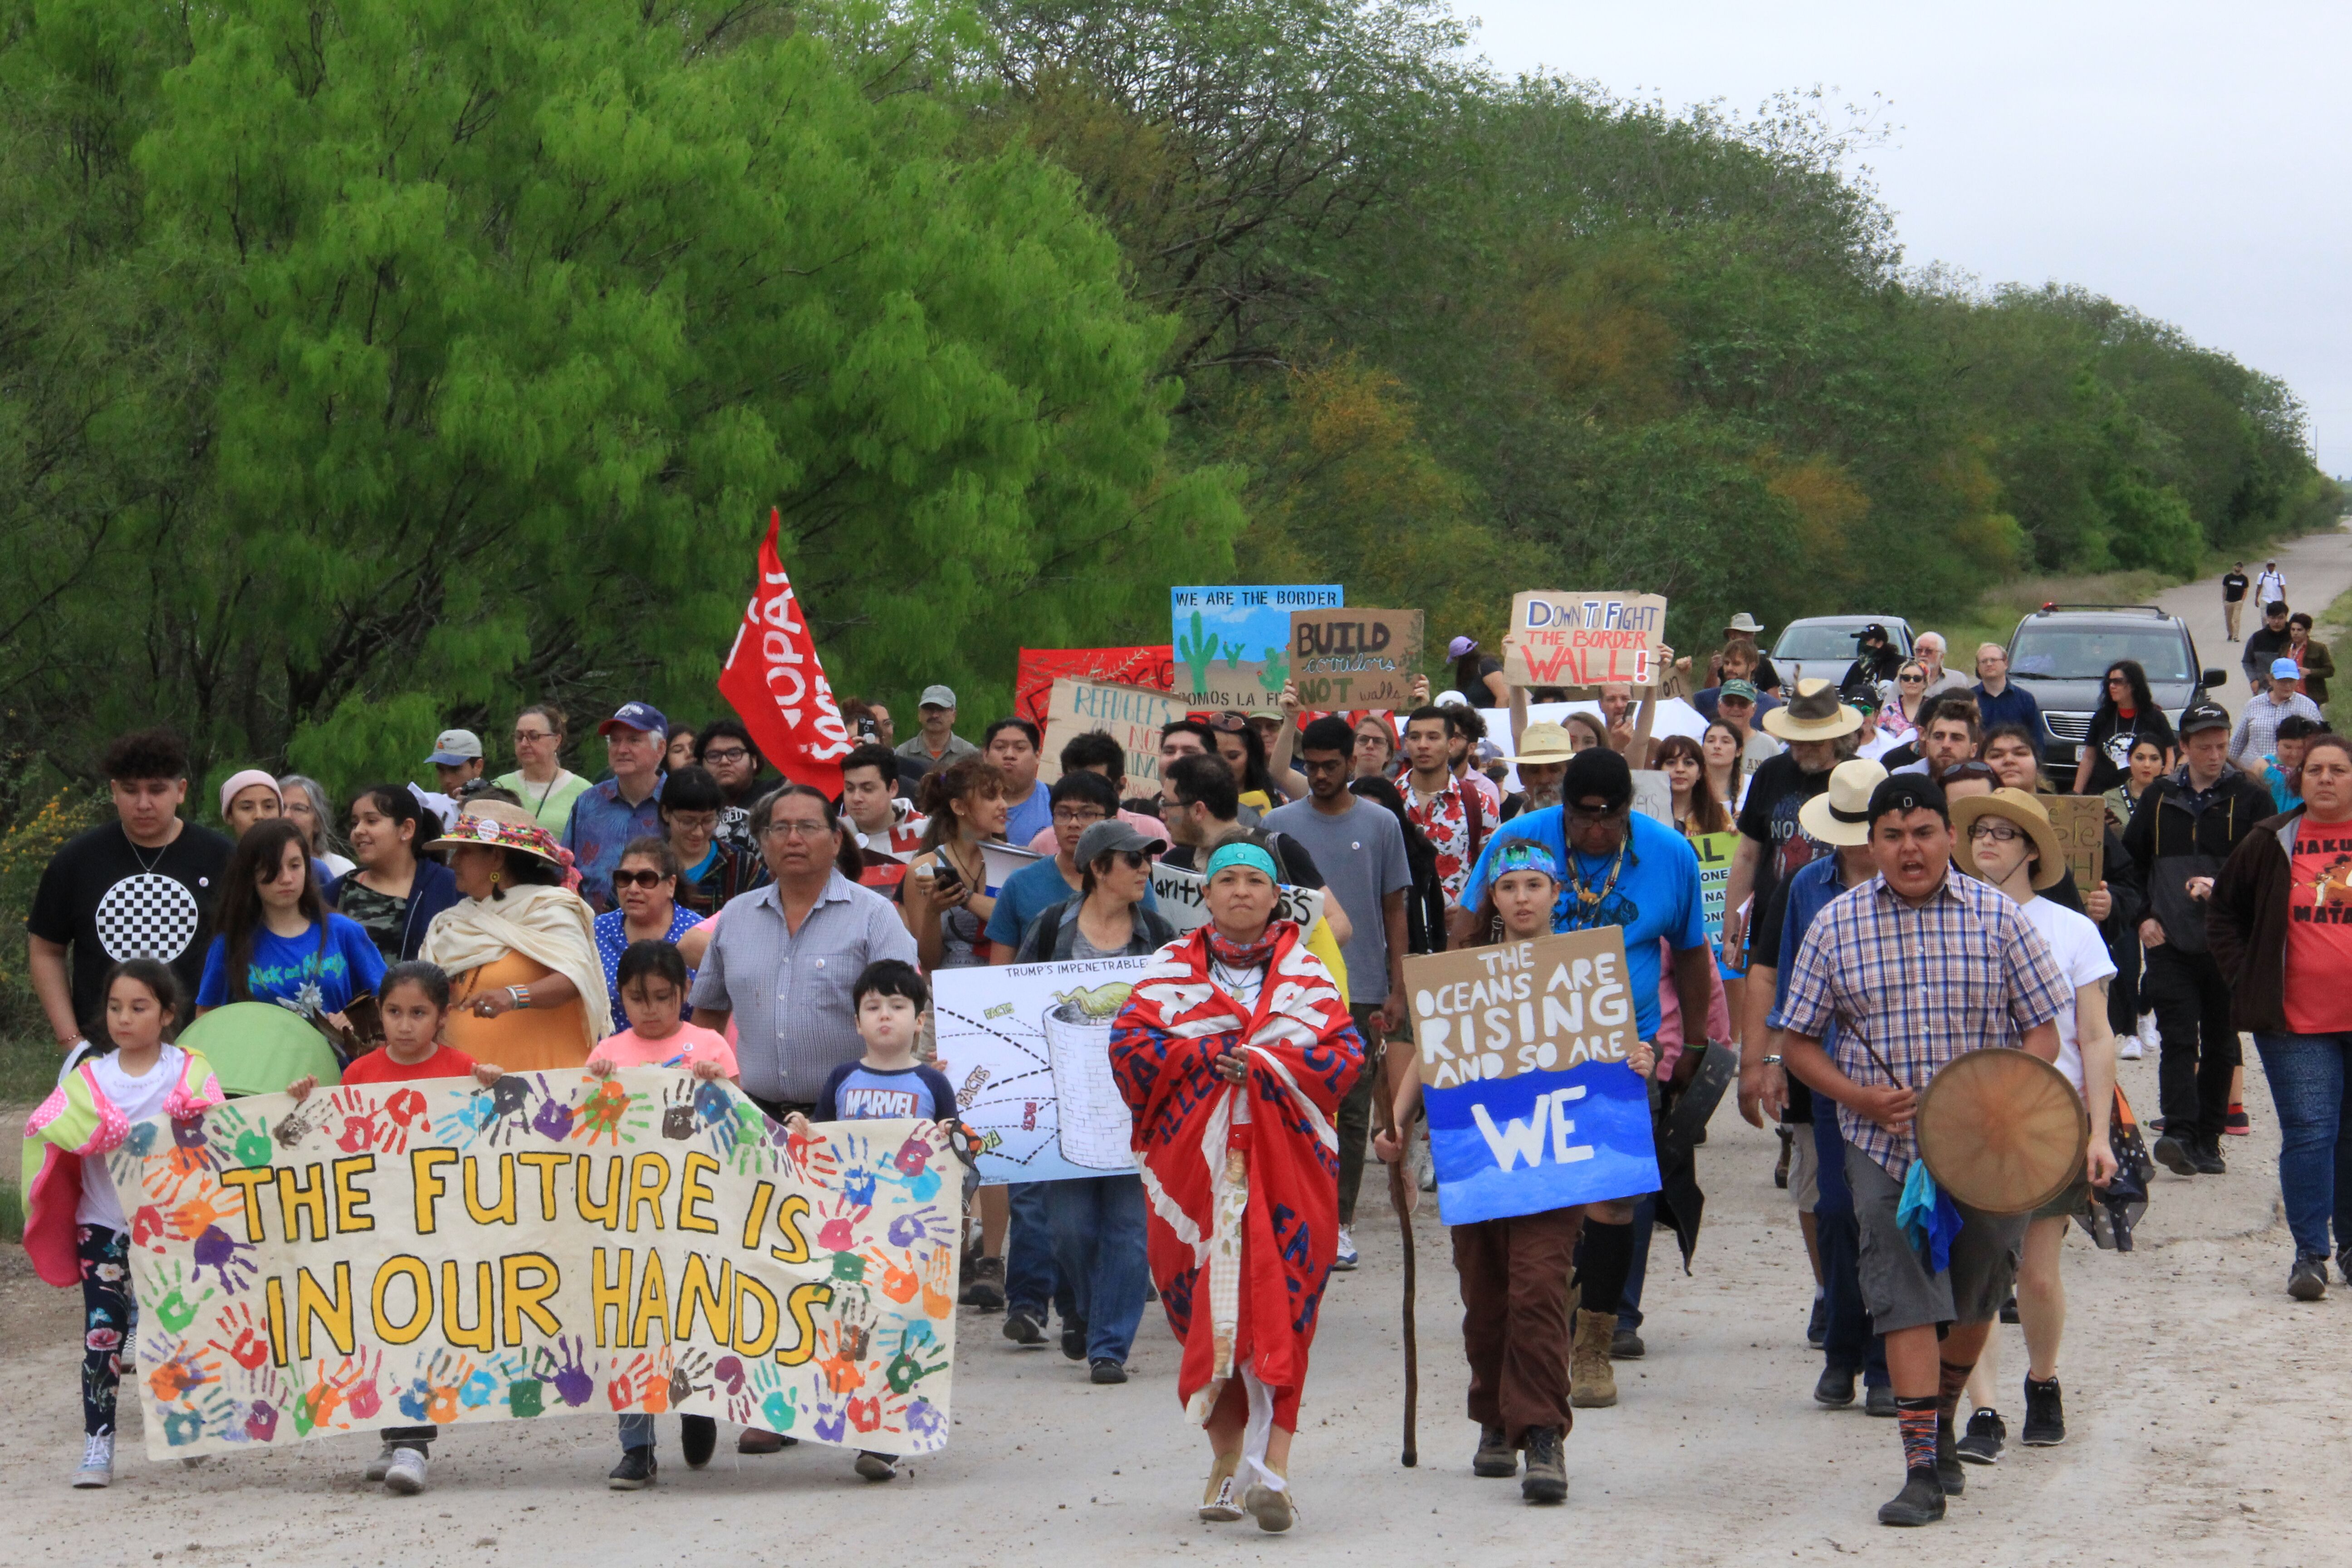 Rio Grande Valley residents, including and Native and environmental activists, march from the National Butterfly Center in Mission, Texas, toward an area where Trump’s proposed border fence is slated to go up on Sunday, March 3, 2019. The annual climate march and rally centered the border wall’s impacts on the land and wildlife in the area.